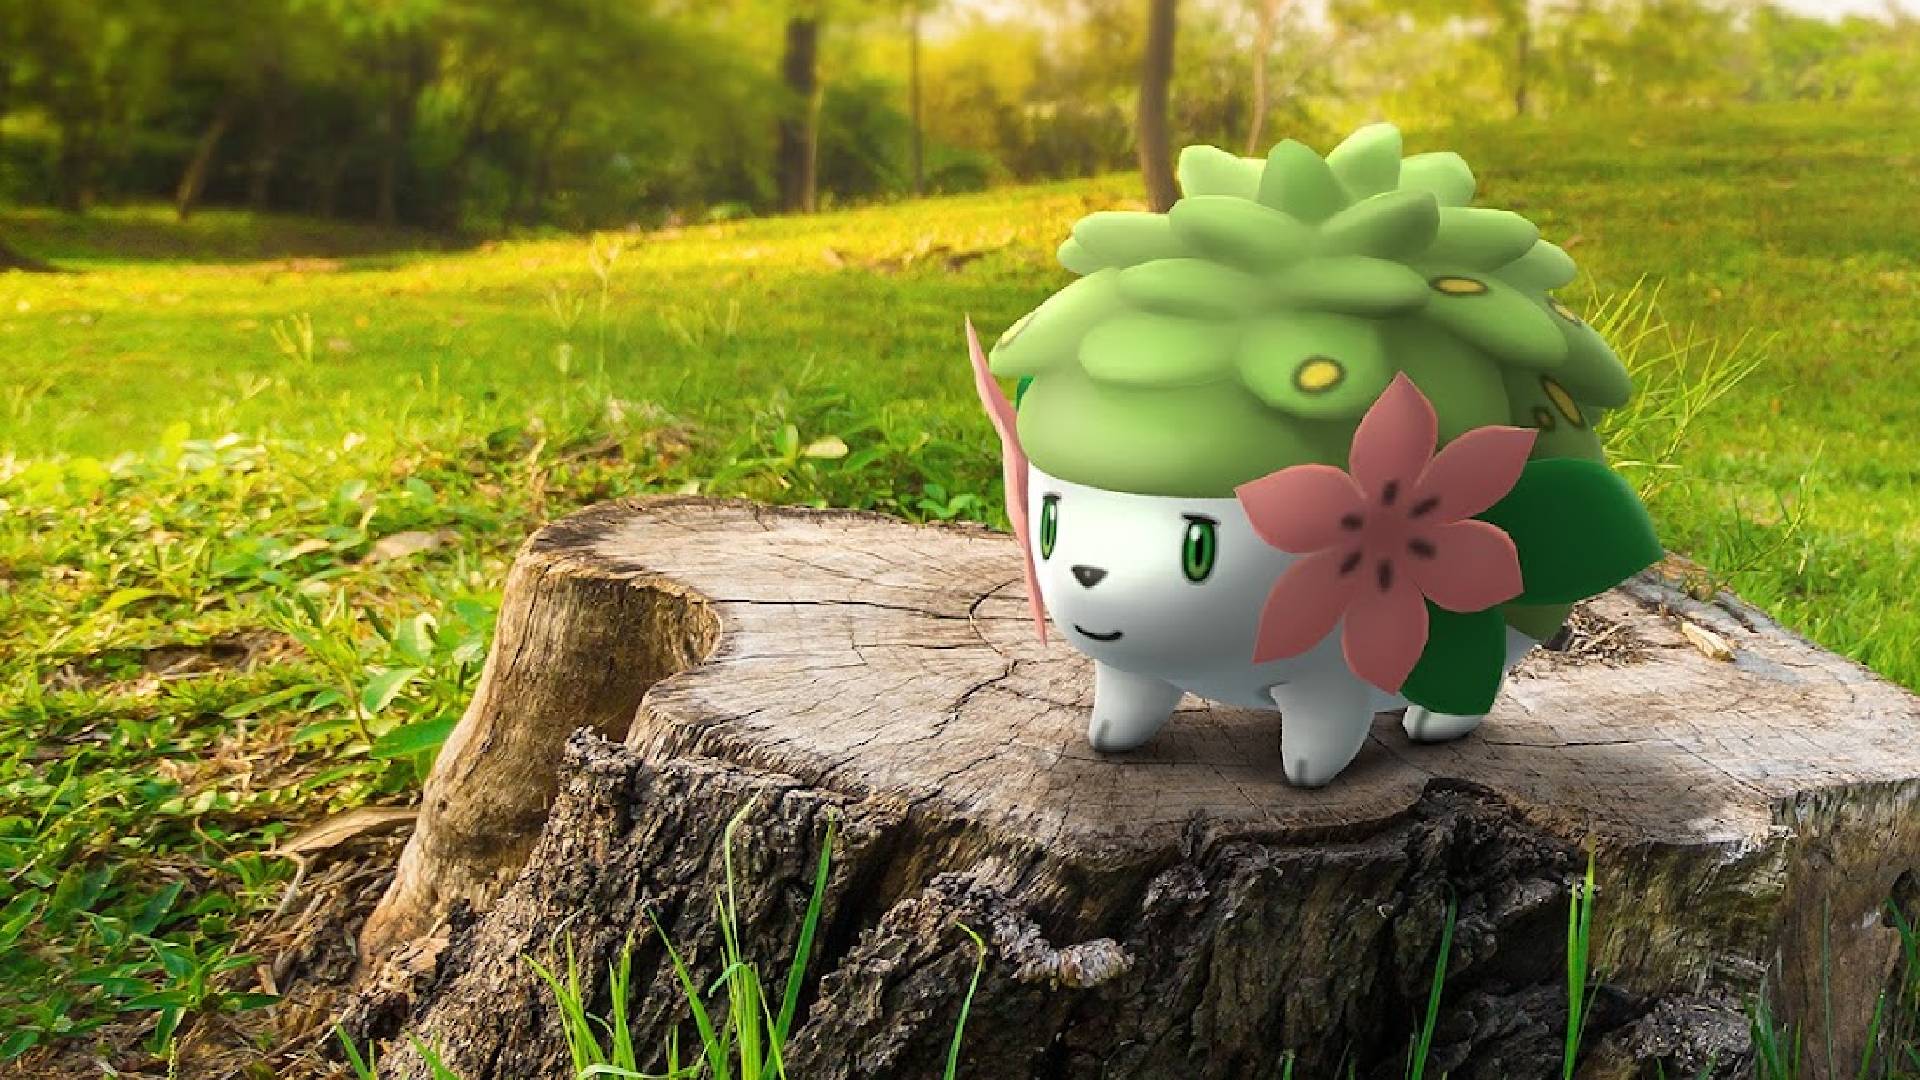 Pokemon Go  Shaymin (Sky Forme) - Stats, Best Moveset & Max CP - GameWith